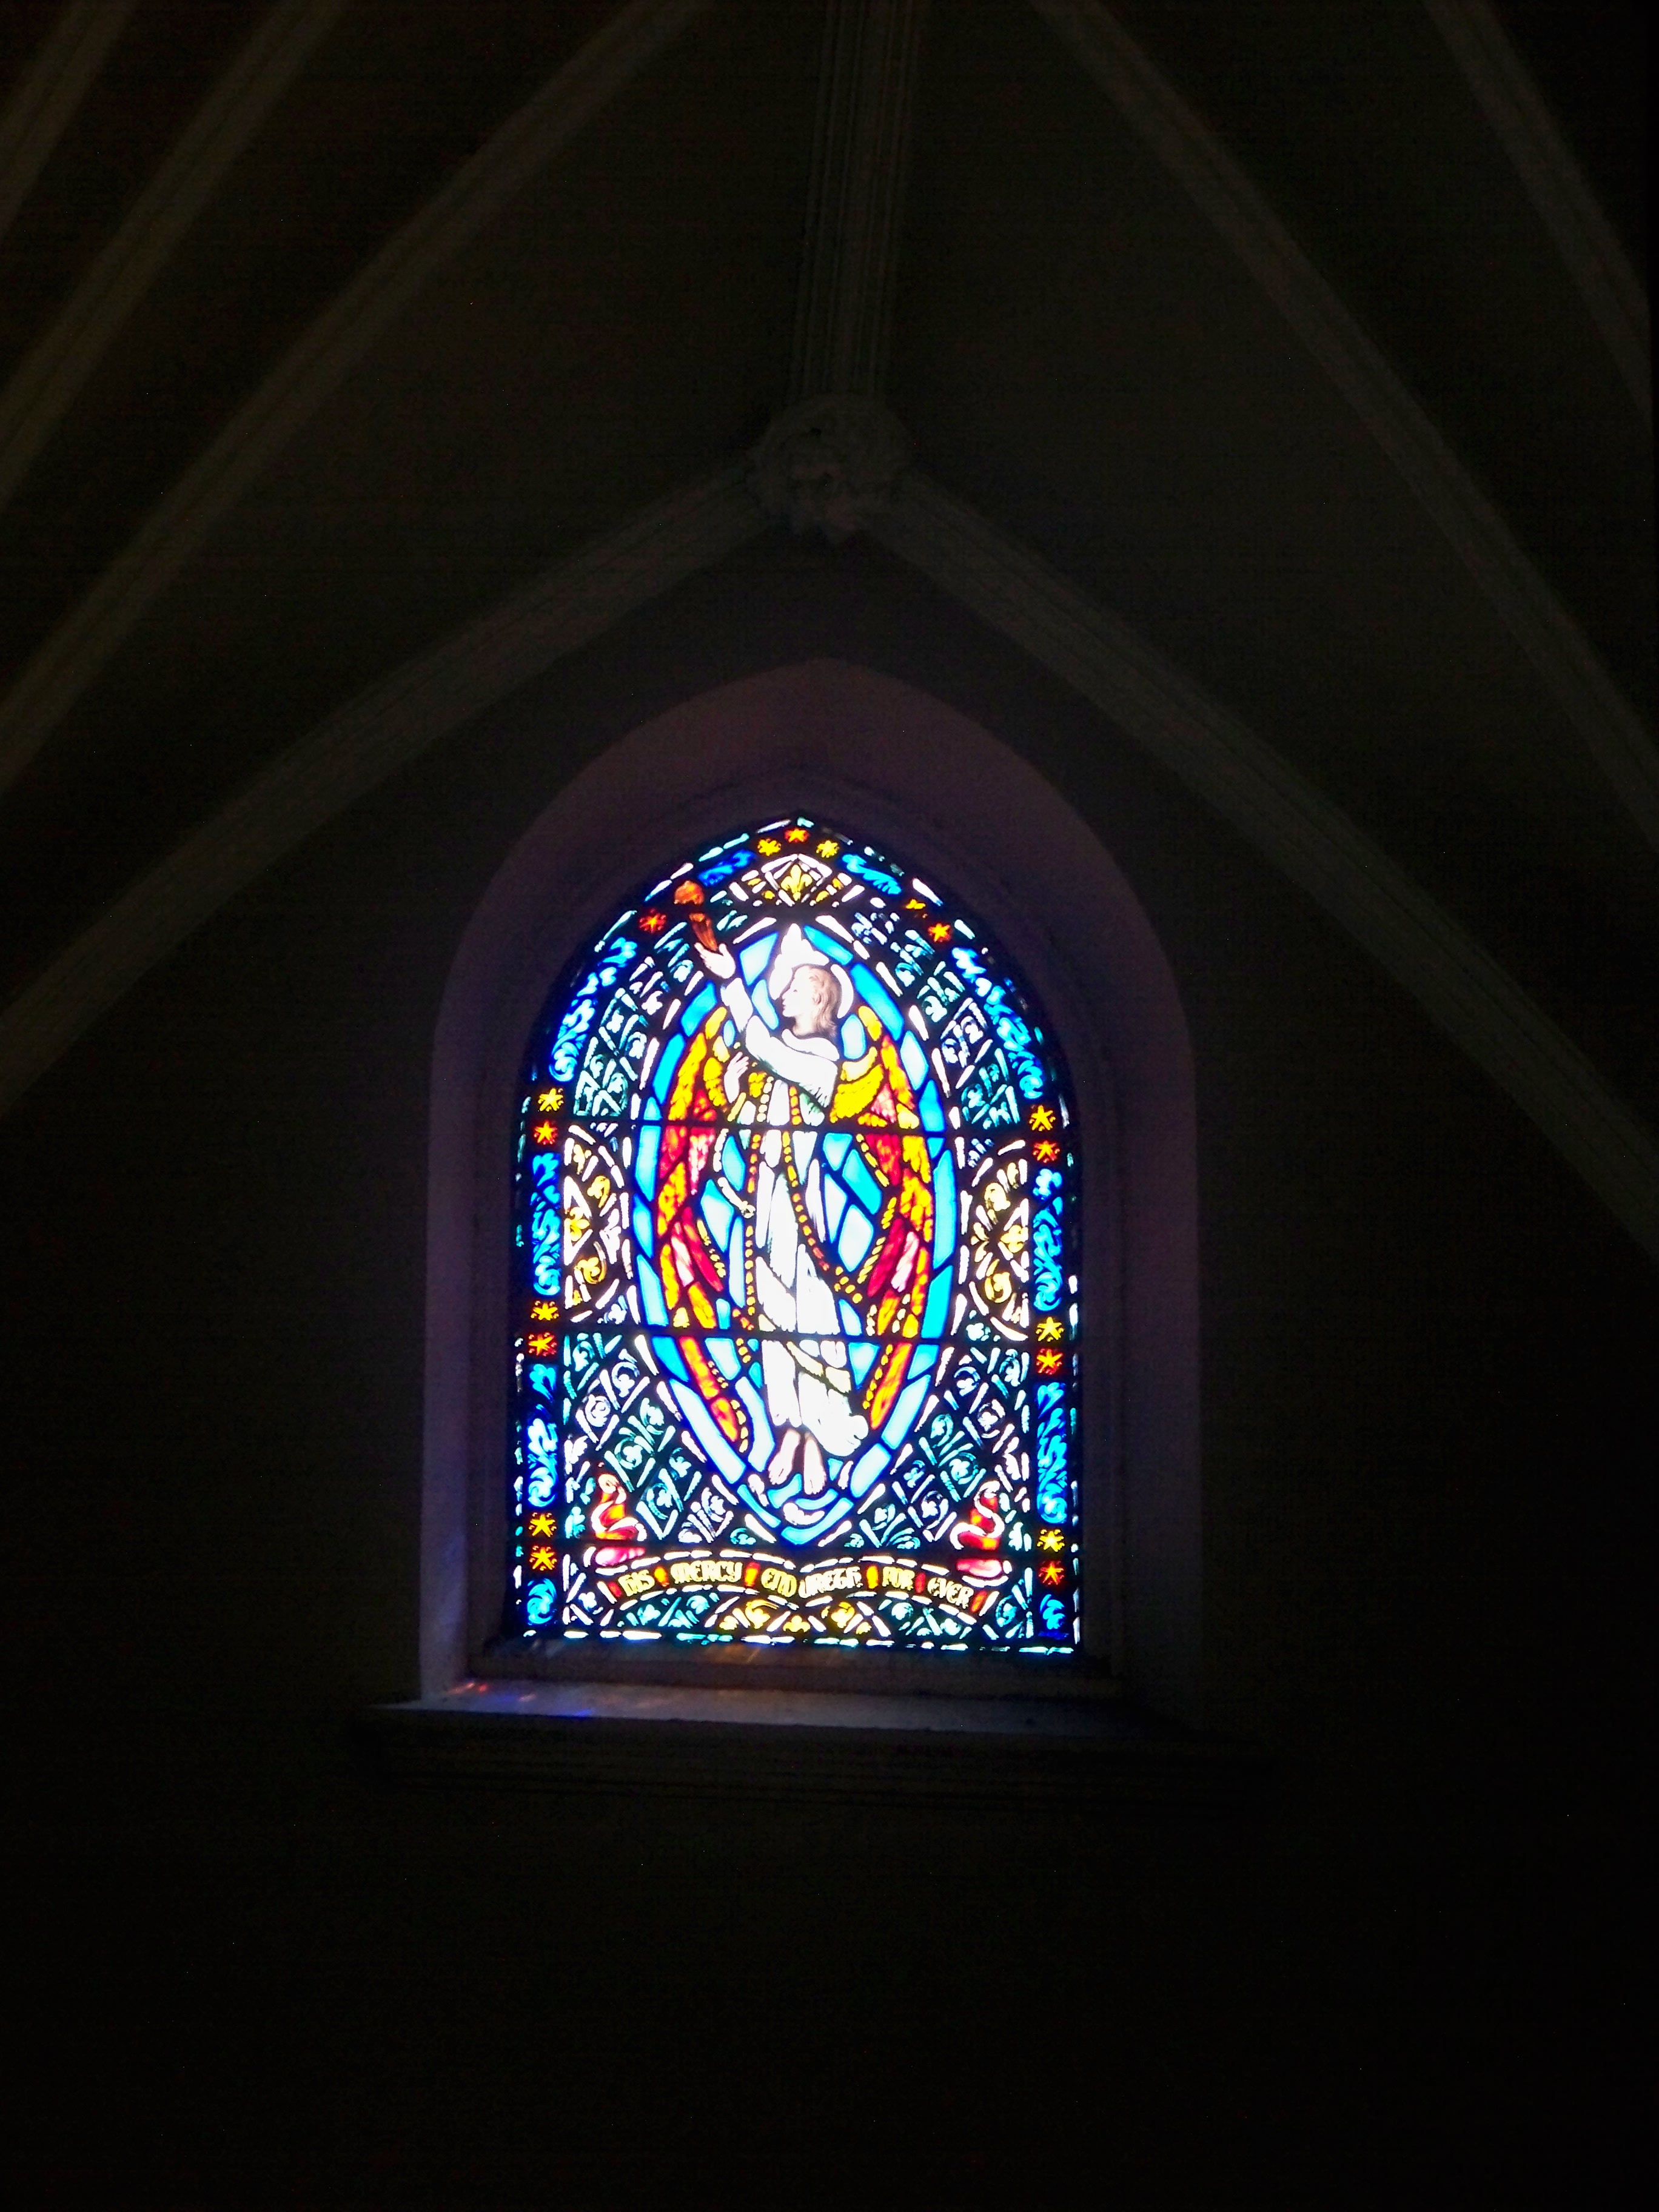 Small stained glass window towards the back of the church